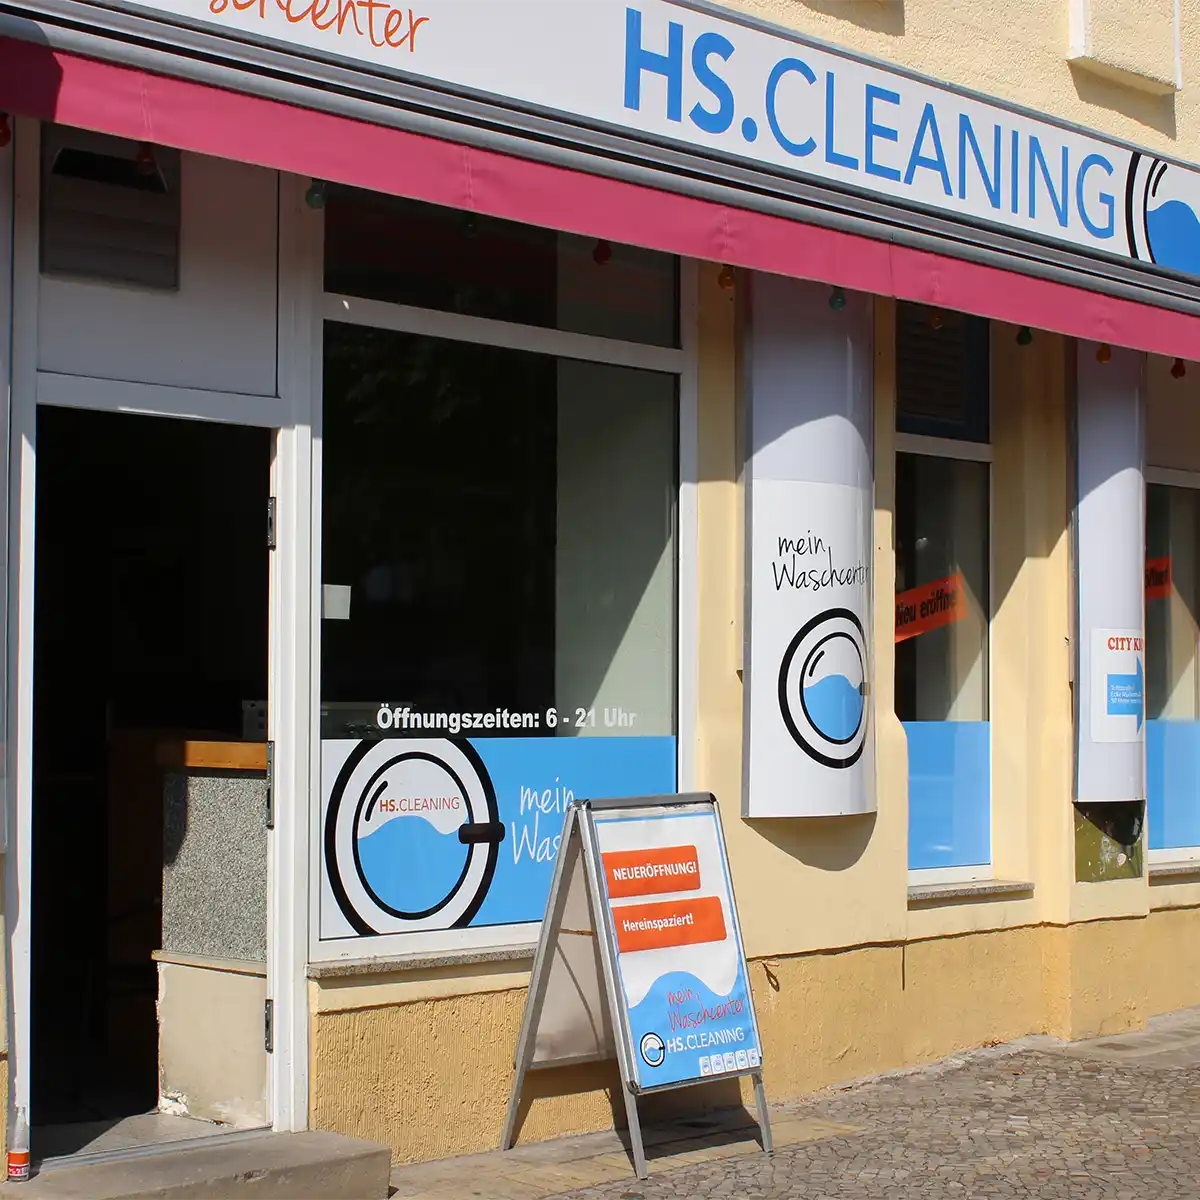 The entrance to the HS.Cleaning washing center. Four shop windows with HS.Cleaning advertising, to the left of which is the entrance